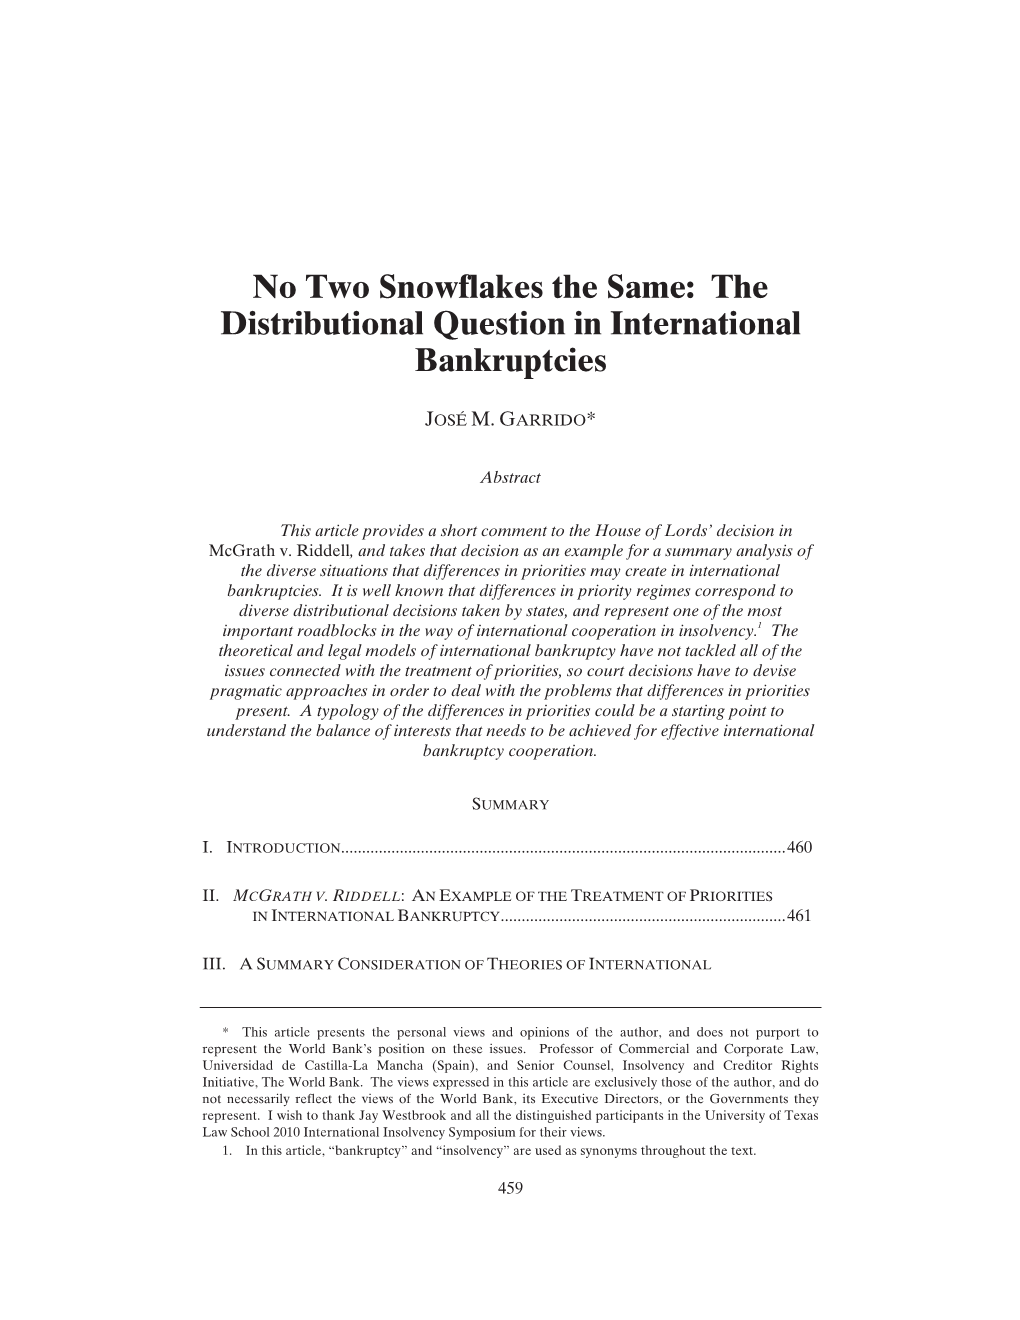 The Distributional Question in International Bankruptcies